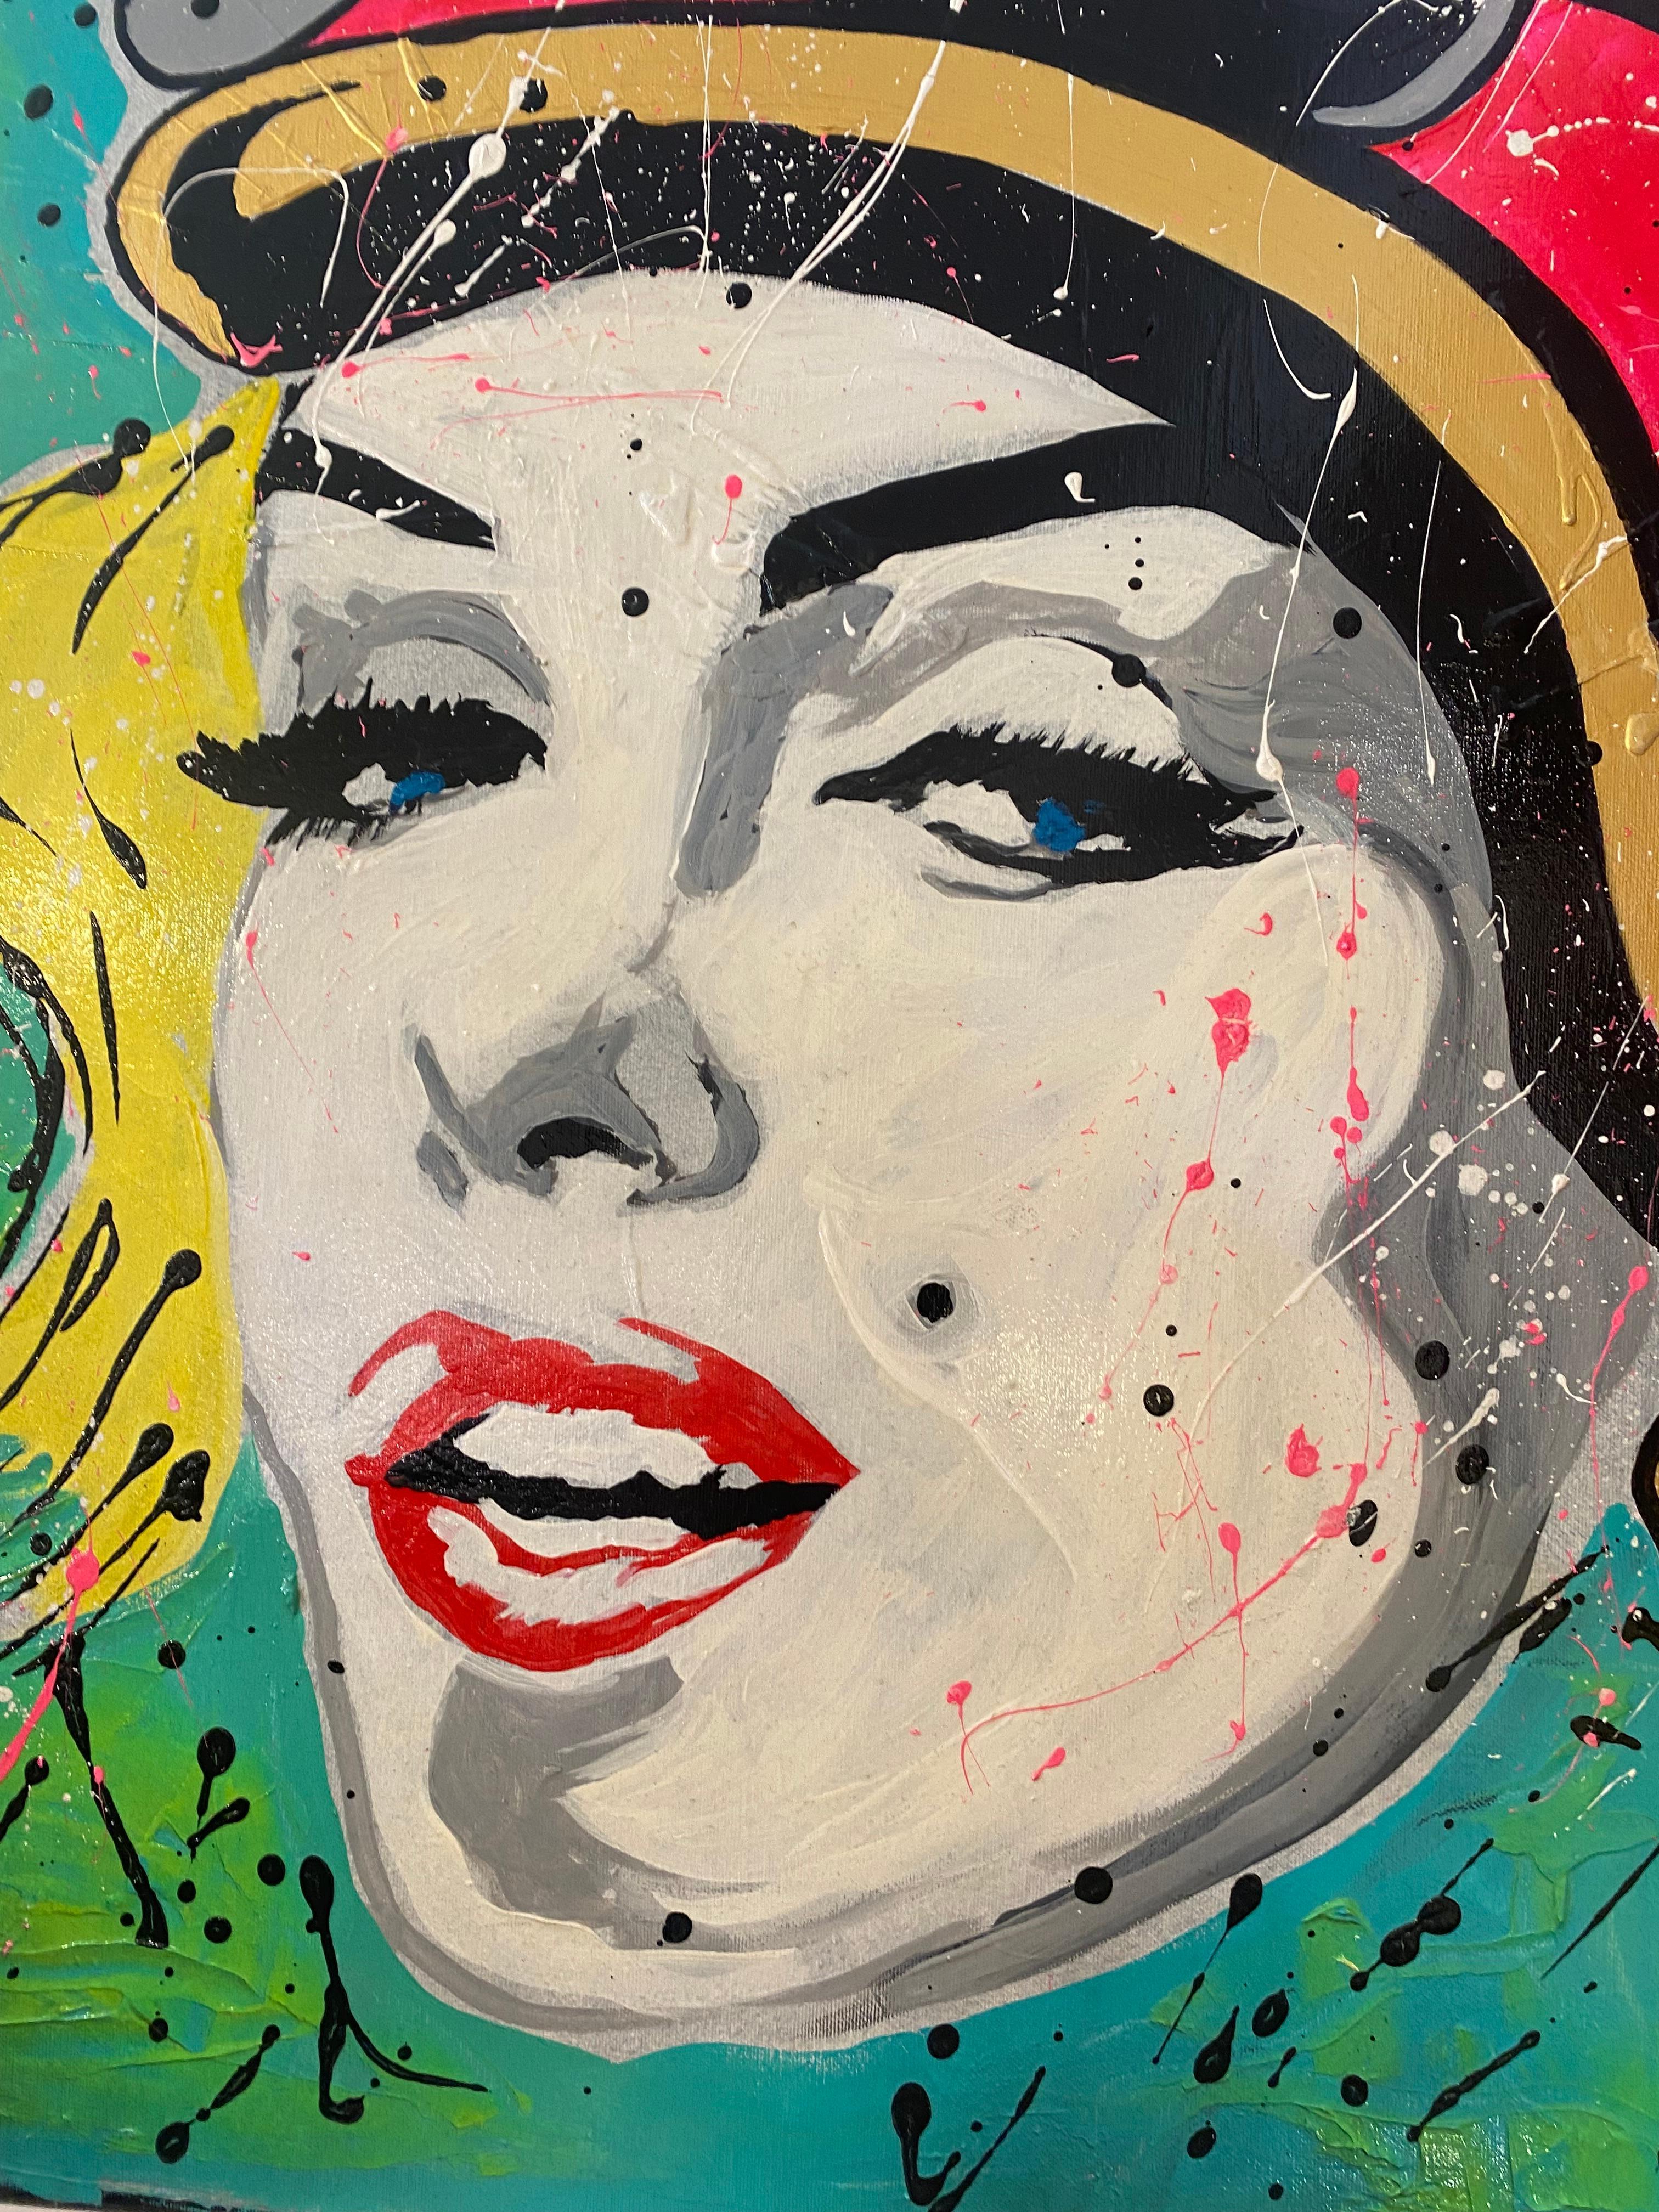 Painting Clem$ - Marilyn Monroe
Mixed media on canvas
Sign
original work
Dimensions: 80x80cm.